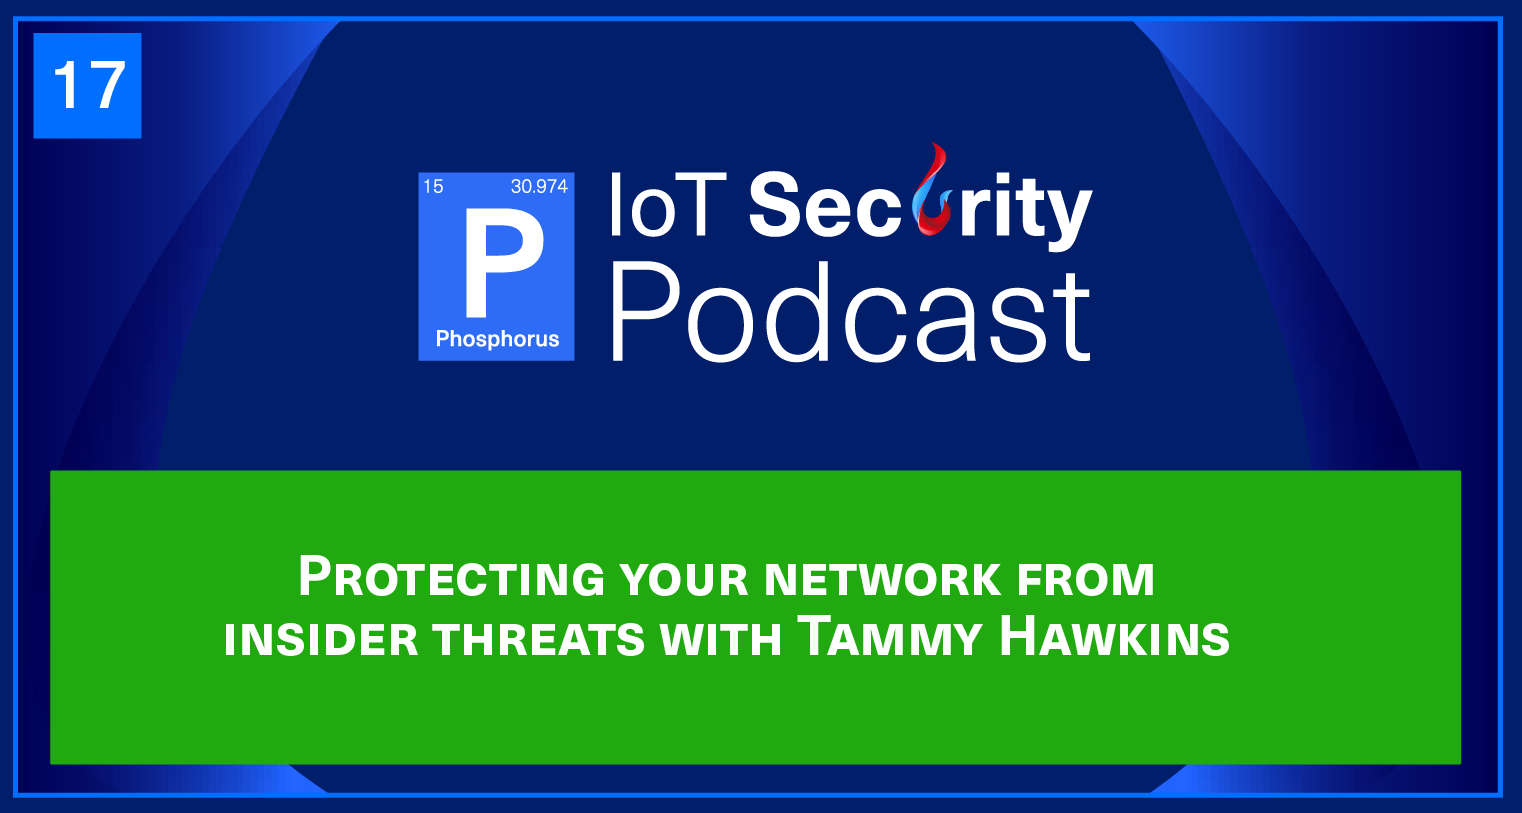 Protecting your network from insider threats with Tammy Hawkins